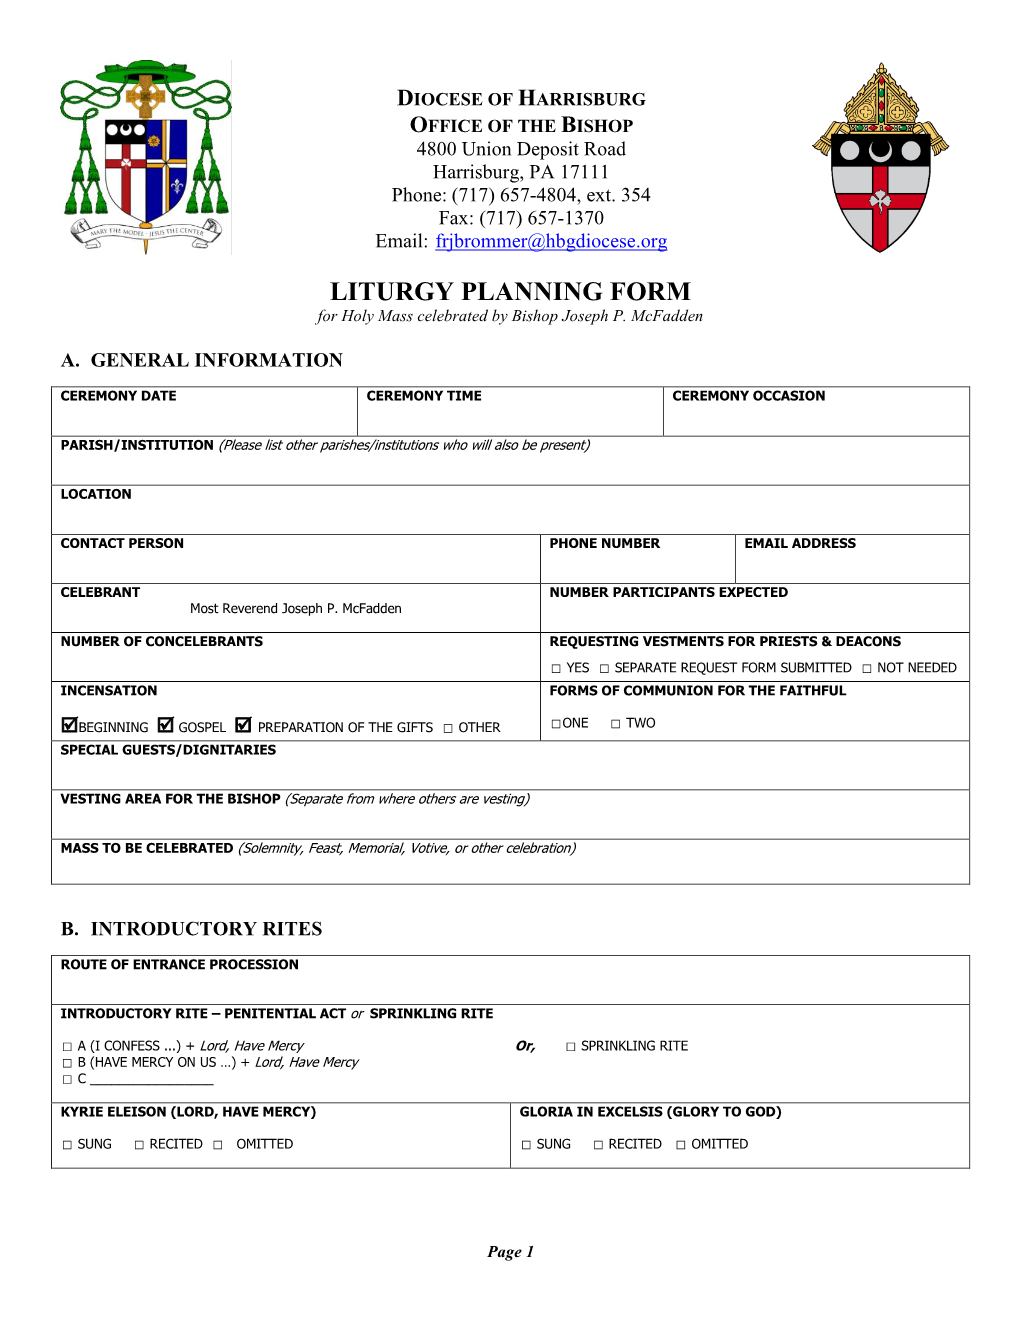 LITURGY PLANNING FORM for Holy Mass Celebrated by Bishop Joseph P